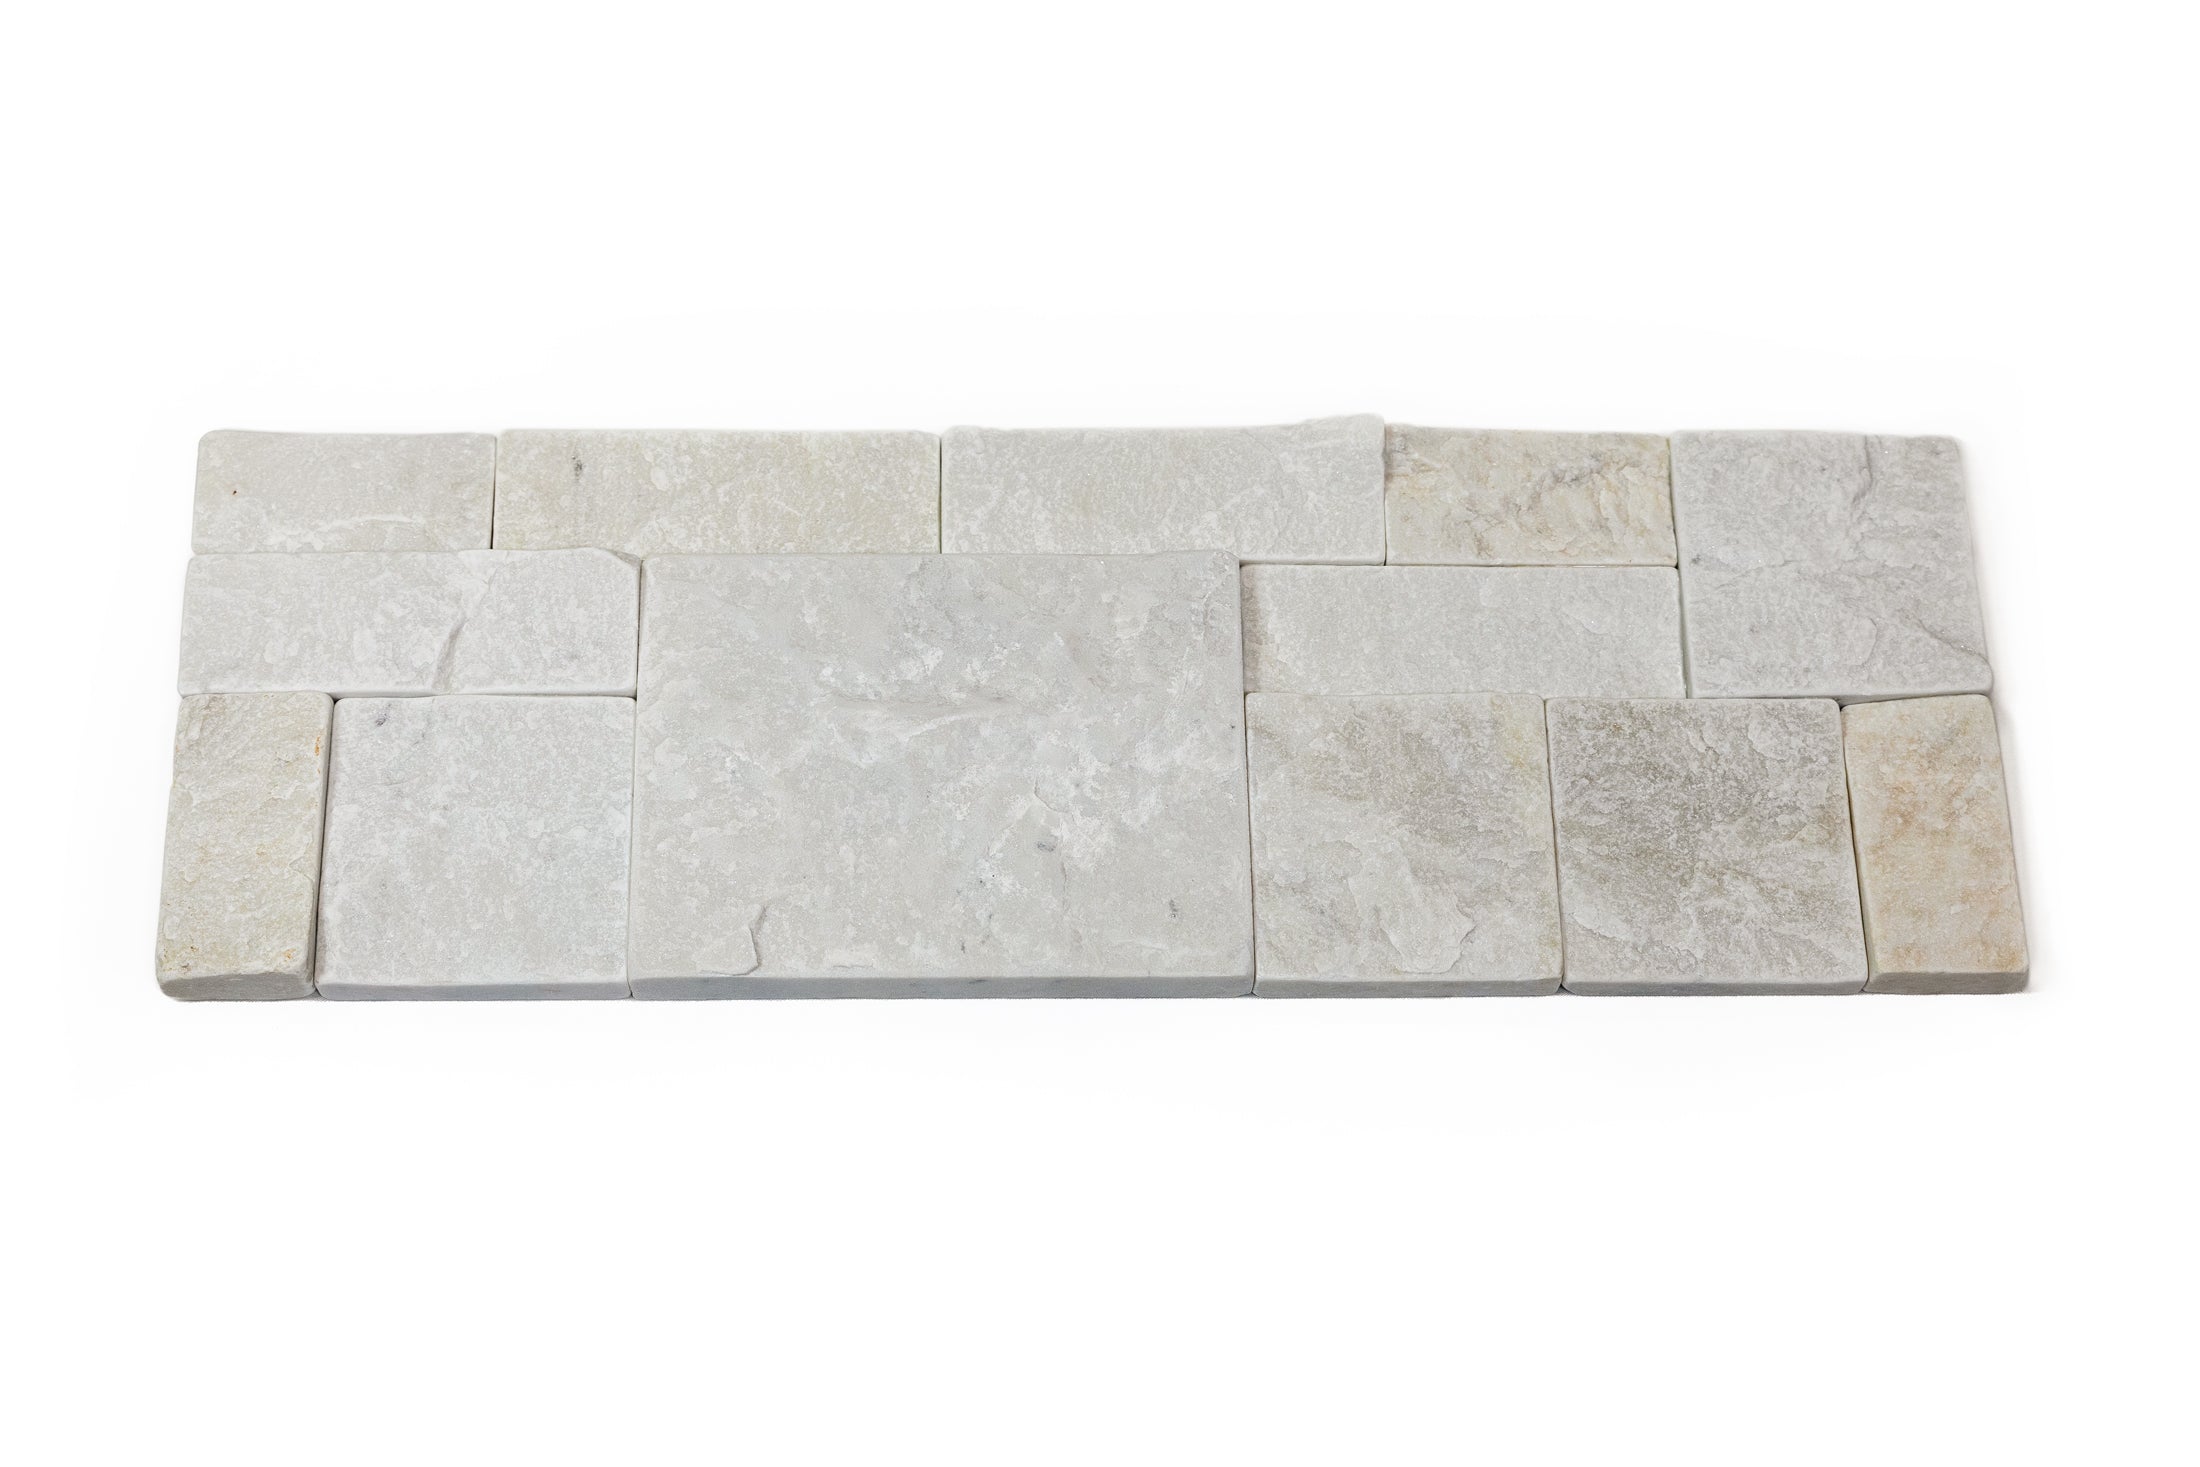 SAMPLE - Natural Stacked Stone Wall Cladding Panels - Tumbled Milky White Montage